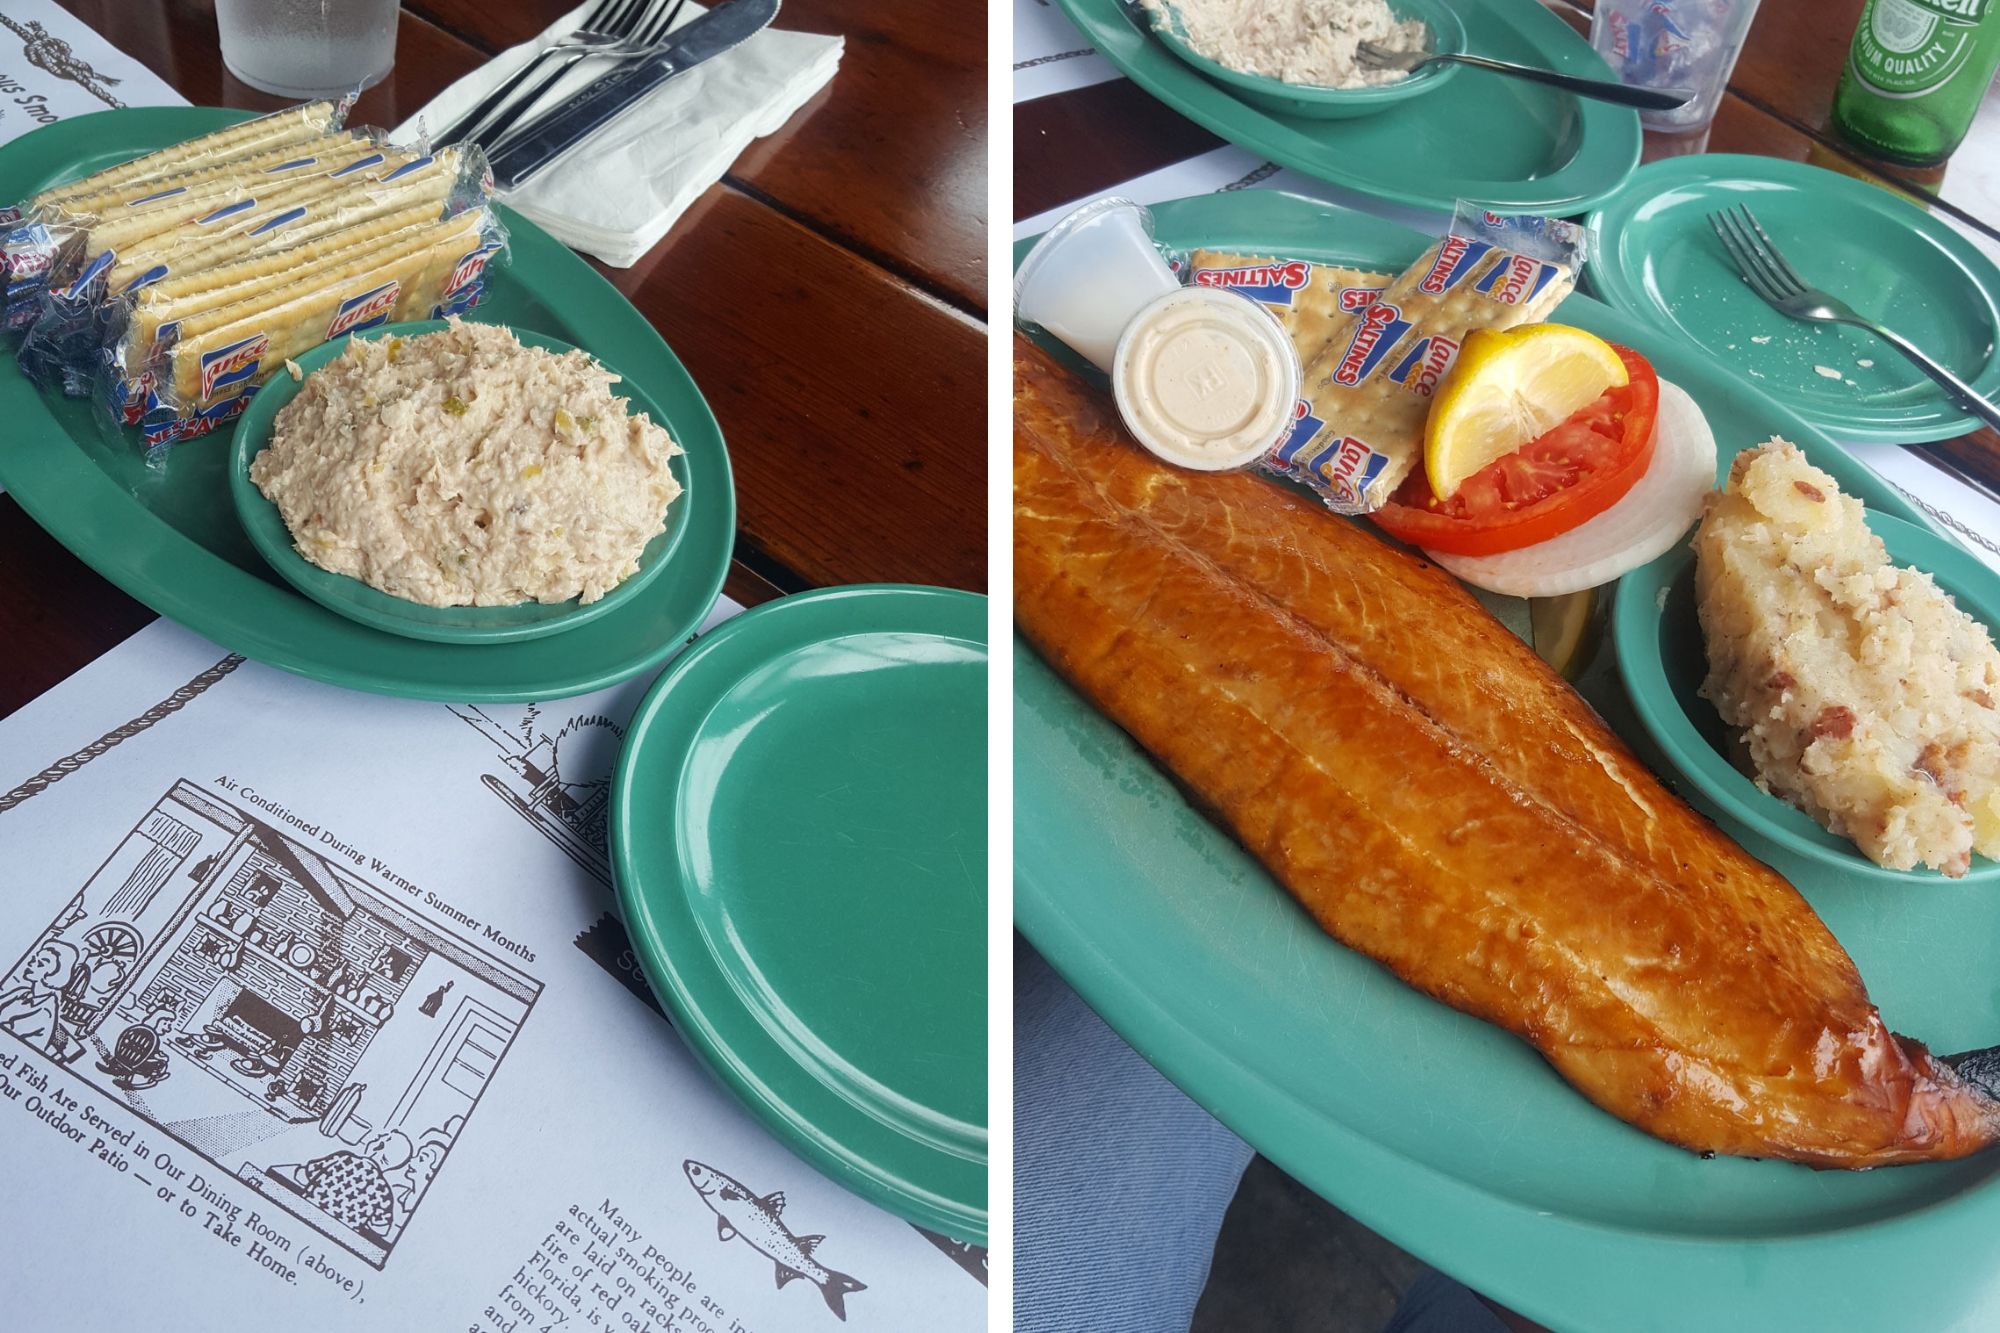 Platter of smoked fish and an order of their fish dip